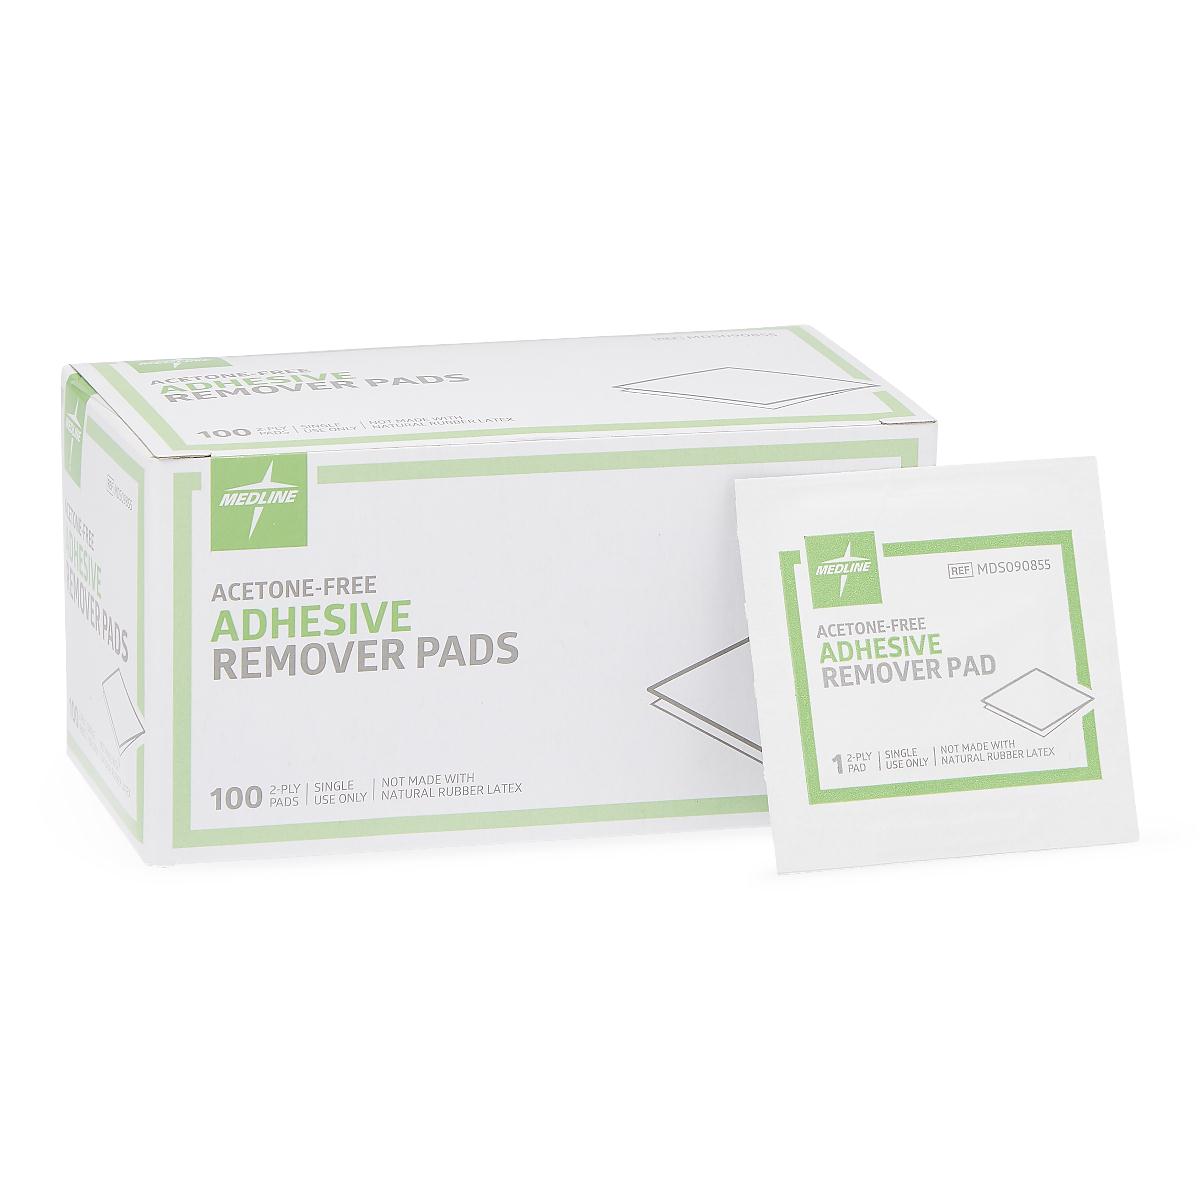 Adhesive Remover Pads, Box of 100